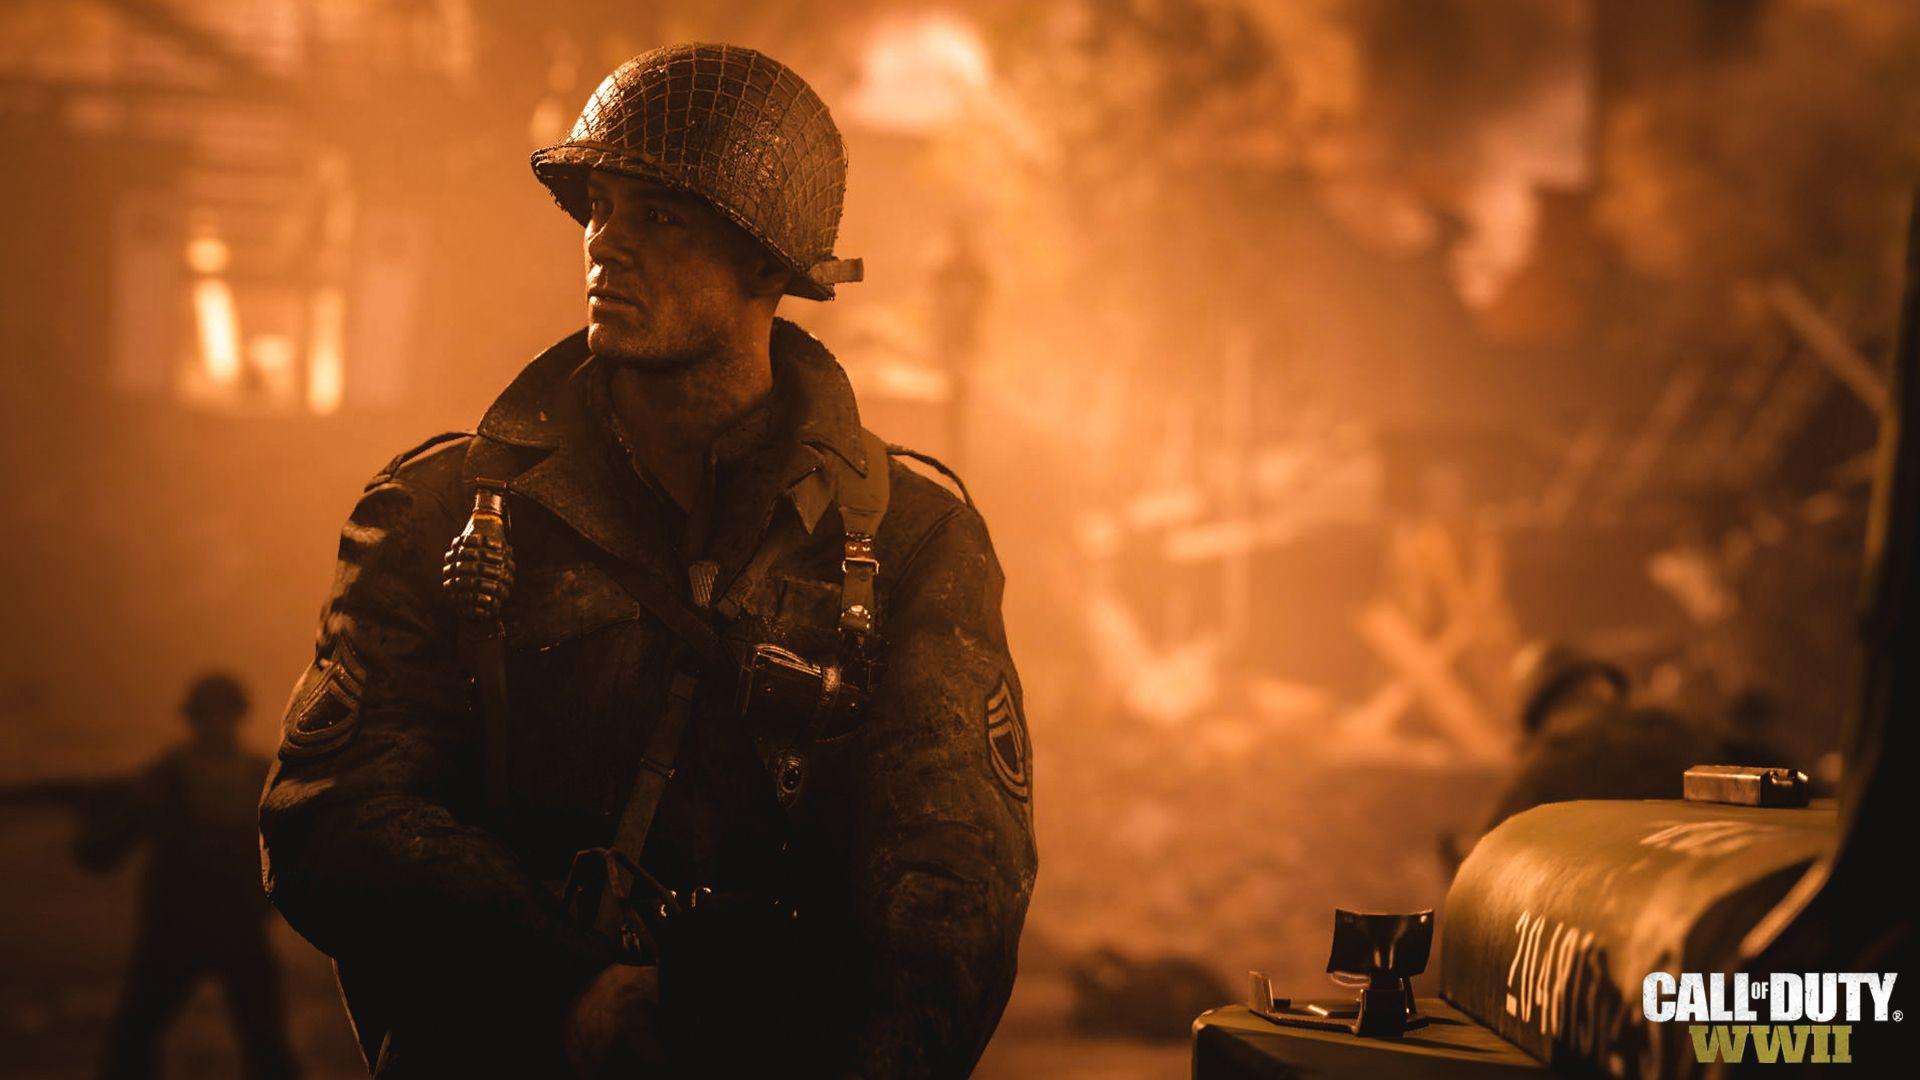 Call of Duty: WWII Gets First 1080p Screenshots Showing its Gritty